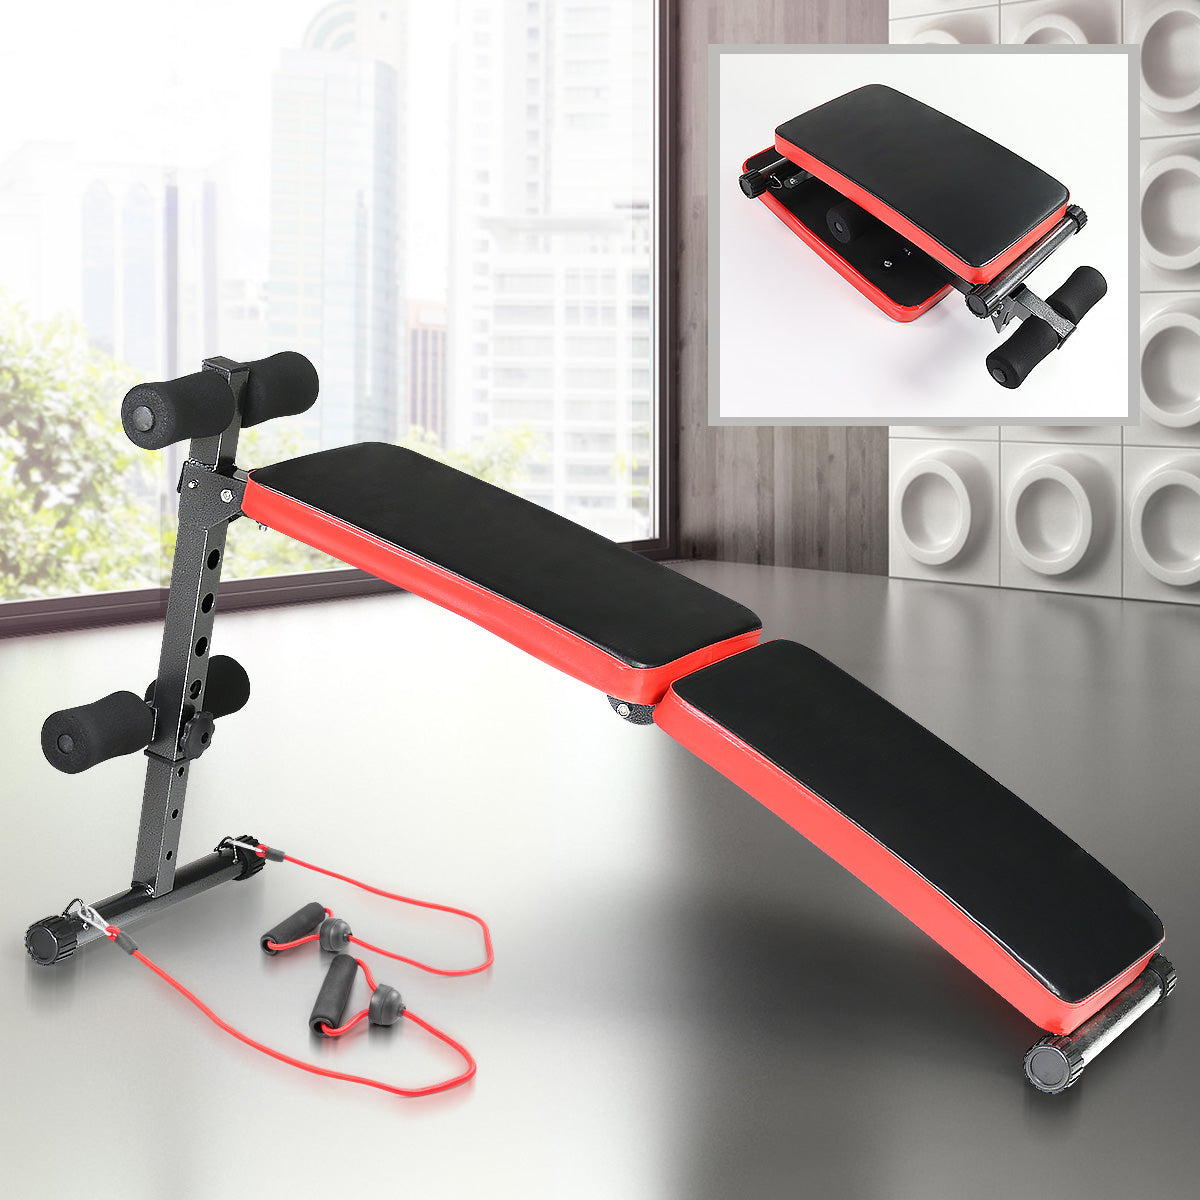 Powertrain Inclined Sit up bench with Resistance bands - SILBERSHELL